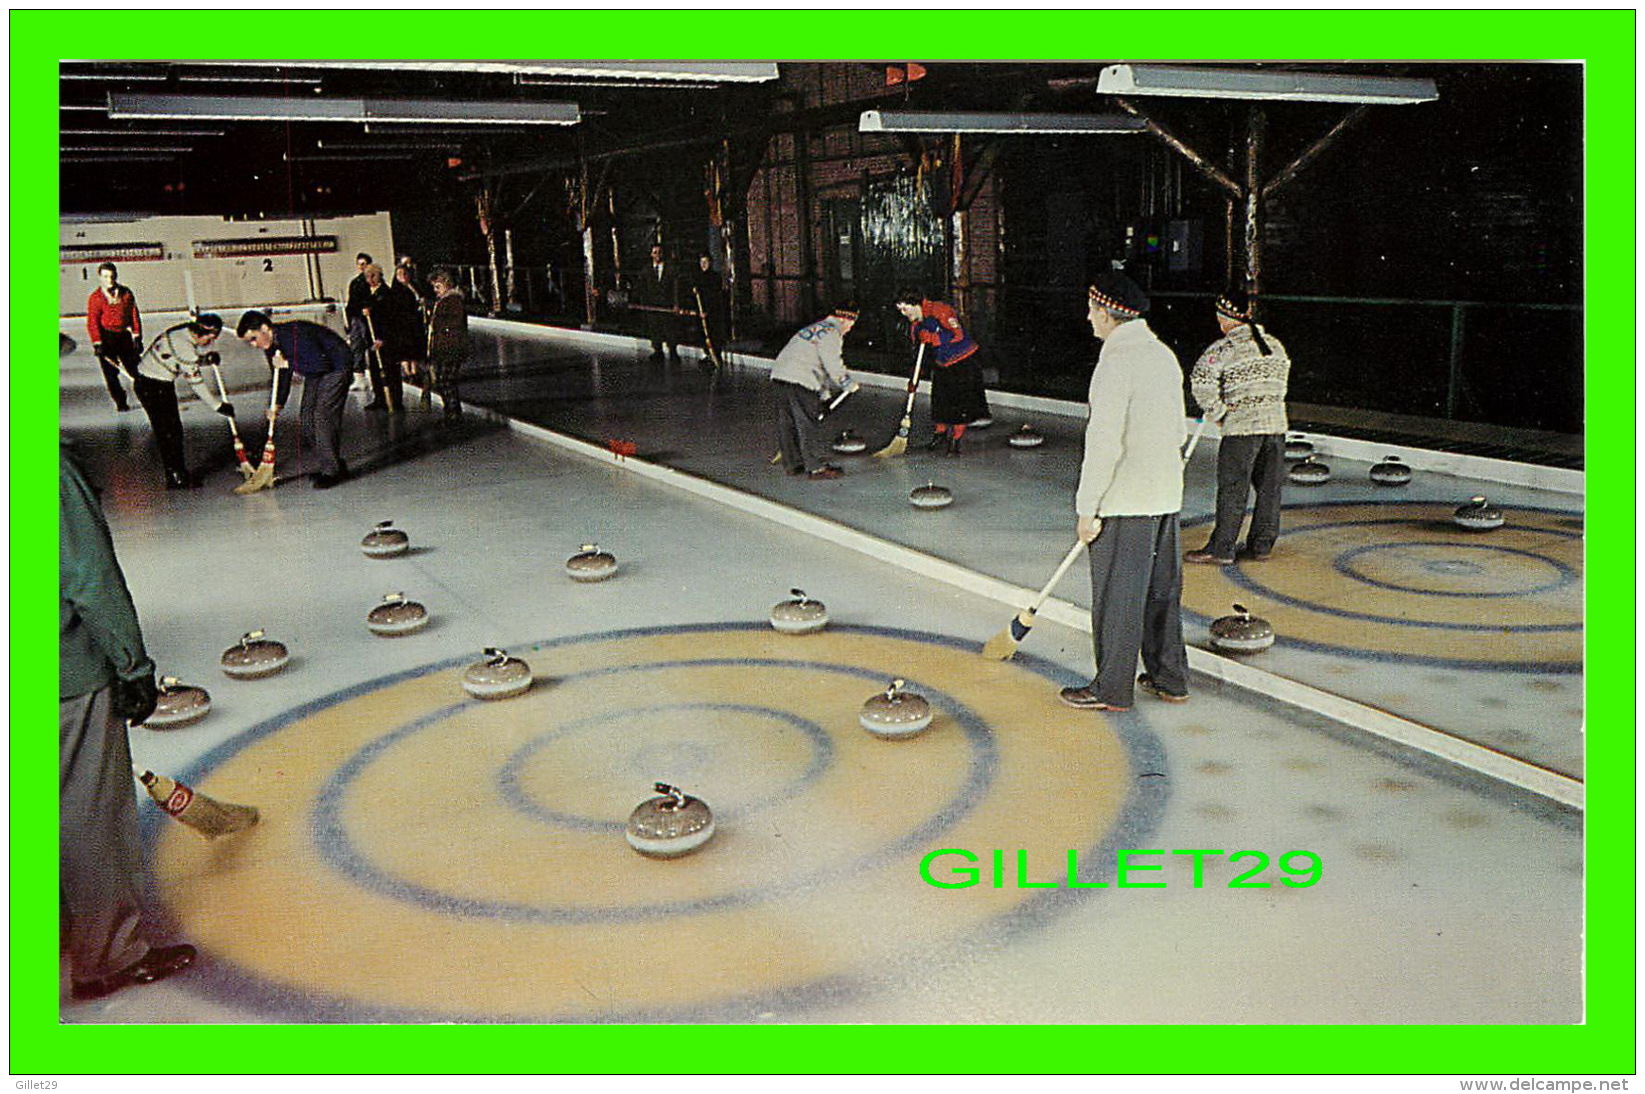 SPORTS D'HIVER - LE CURLING, TWO OF THE FOUR SHEETS OF ICE CURLING AT THE SEIGNIORY CLUB, MONTEBELLO, QUÉBEC - SCHERMER - Sports D'hiver